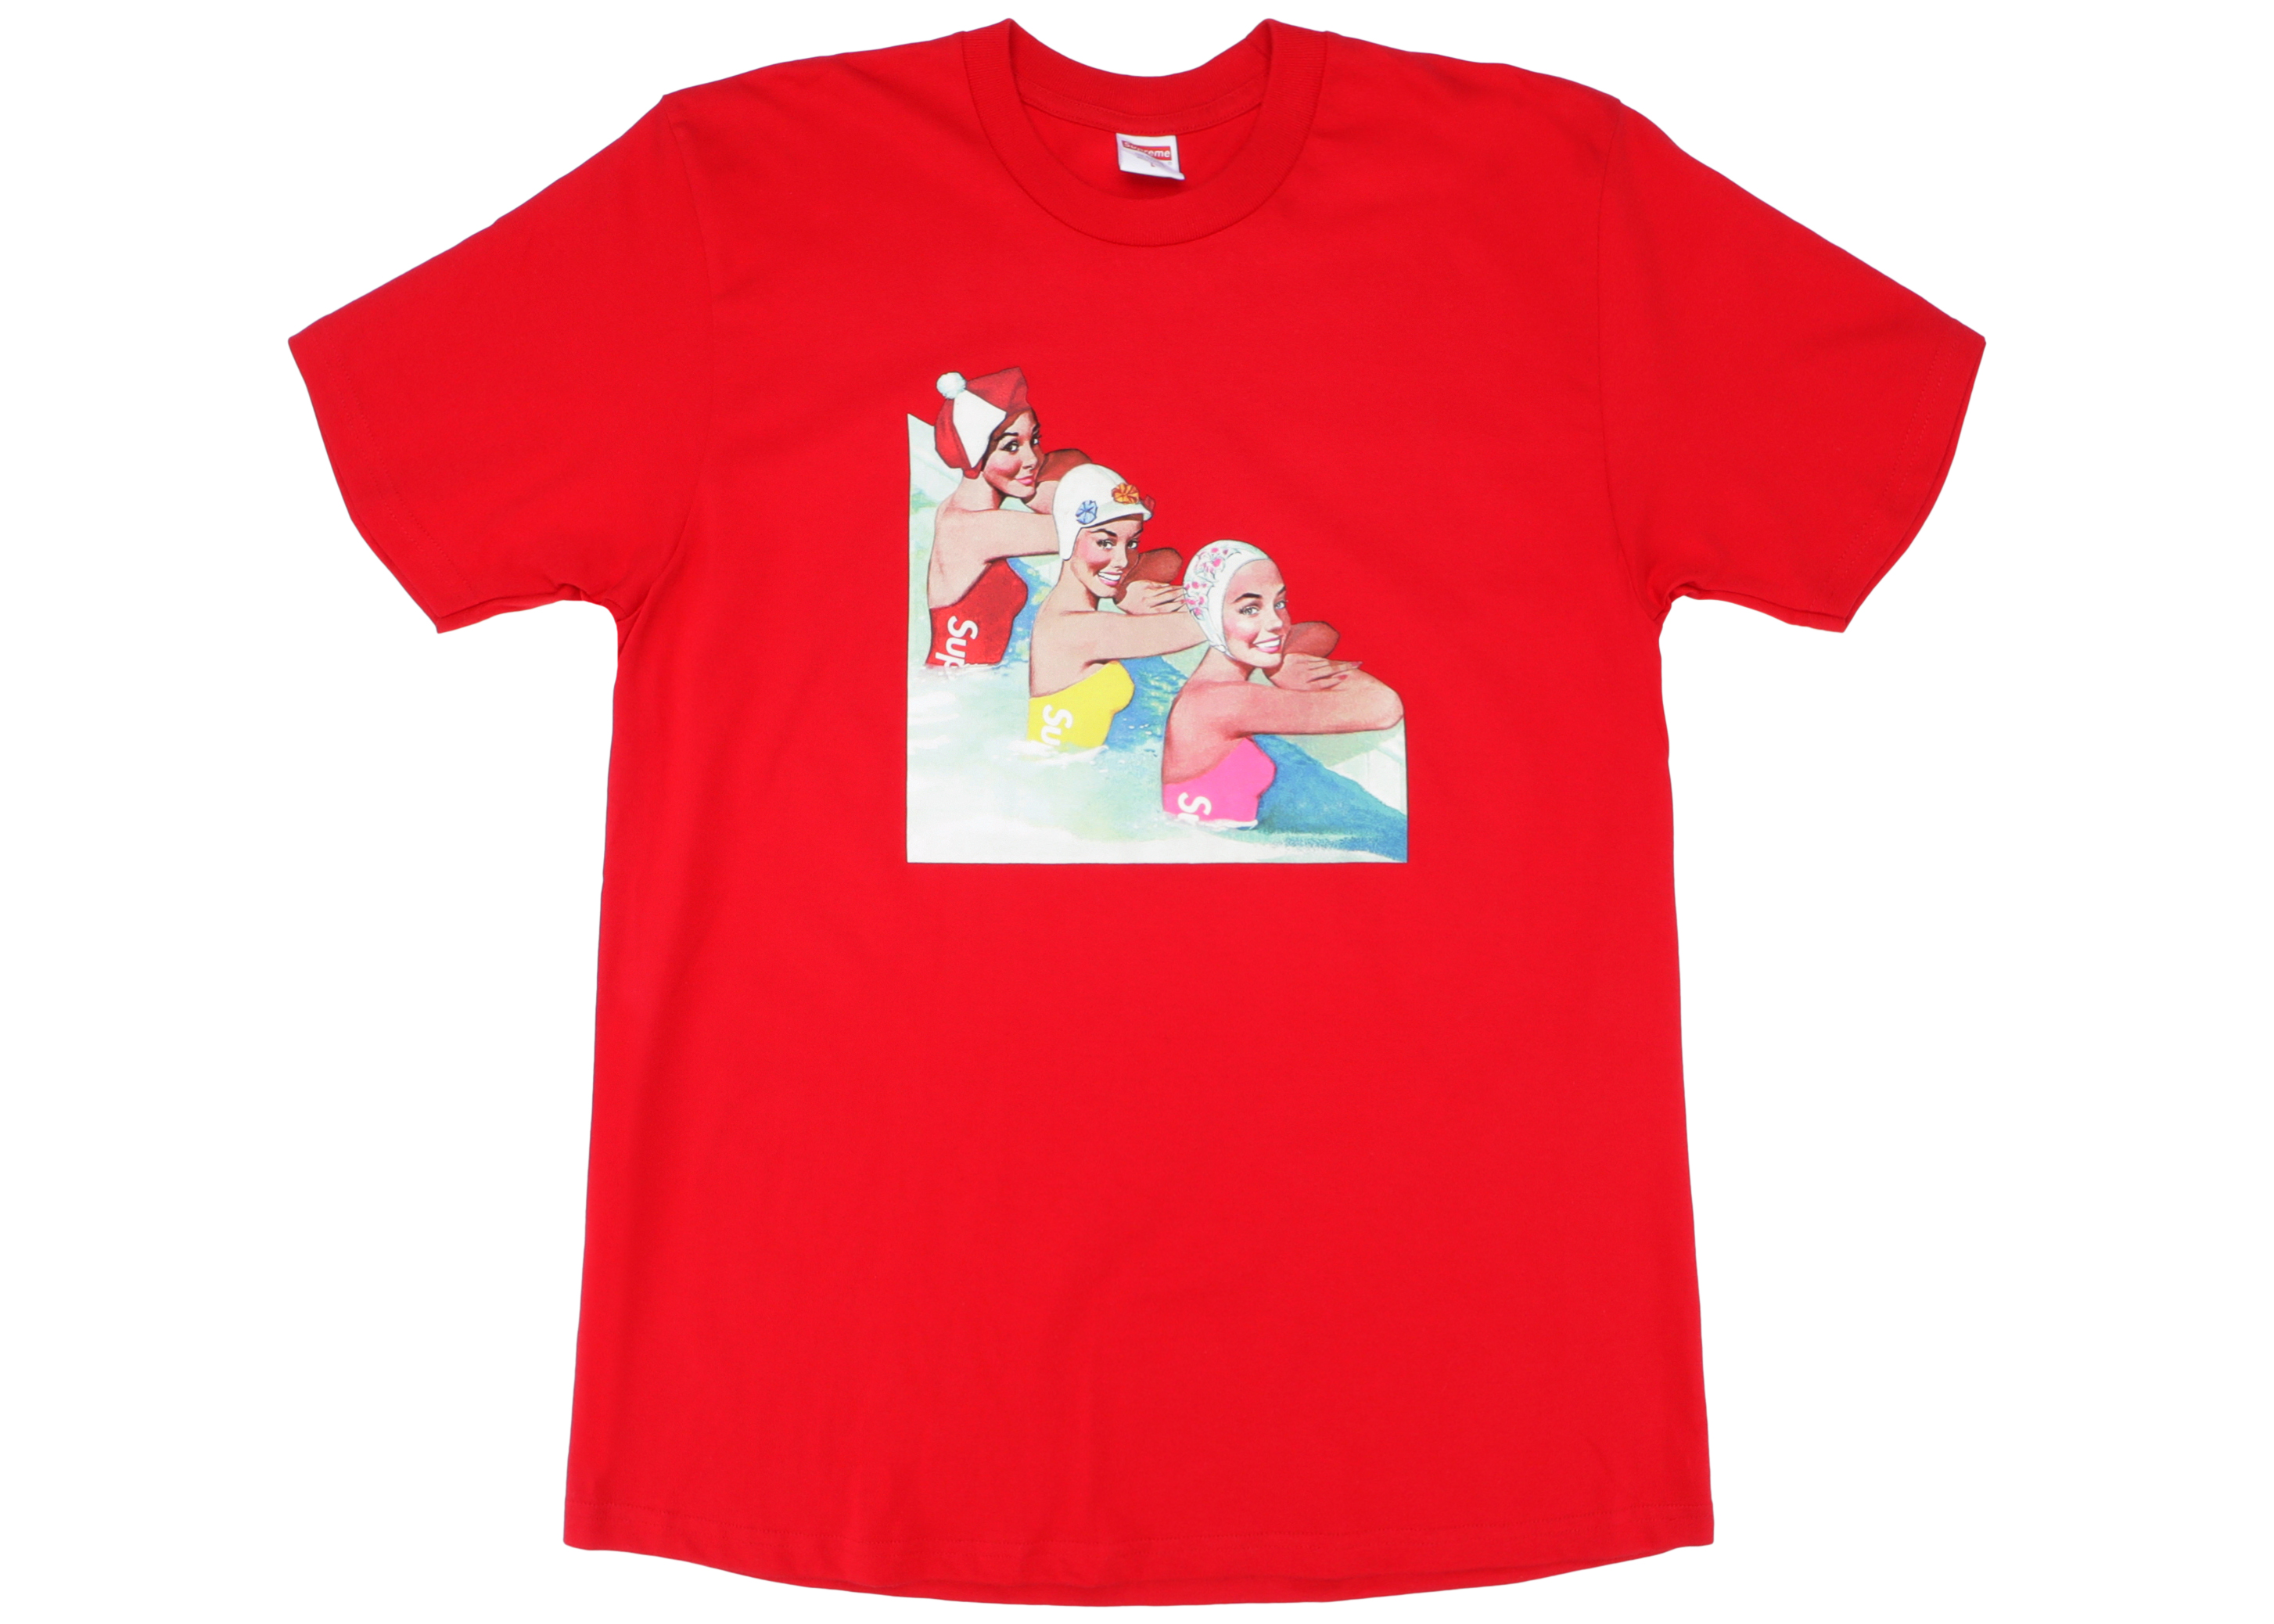 Supreme Swimmers Tee Red Men's - SS18 - US